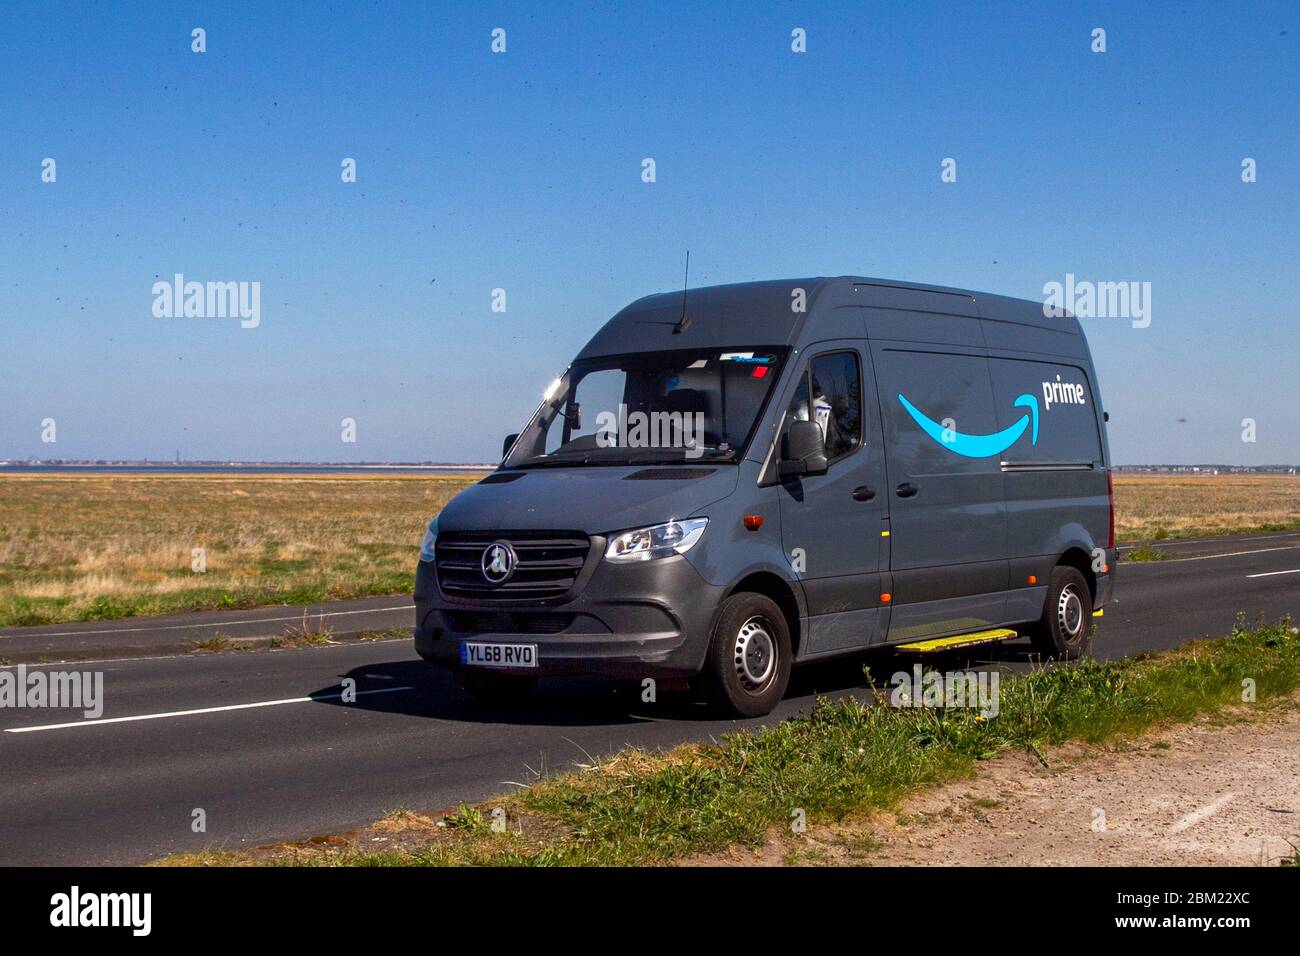 Amazon Prime Sprinter 314 Cdi,314 Cdi 35T FWD L2H2 MWB Opt Start/Stop Grey  LCV High Roof Panel Van Diesel 2143 cc Delivery Van on Southport seafront  coastal road, UK Stock Photo - Alamy